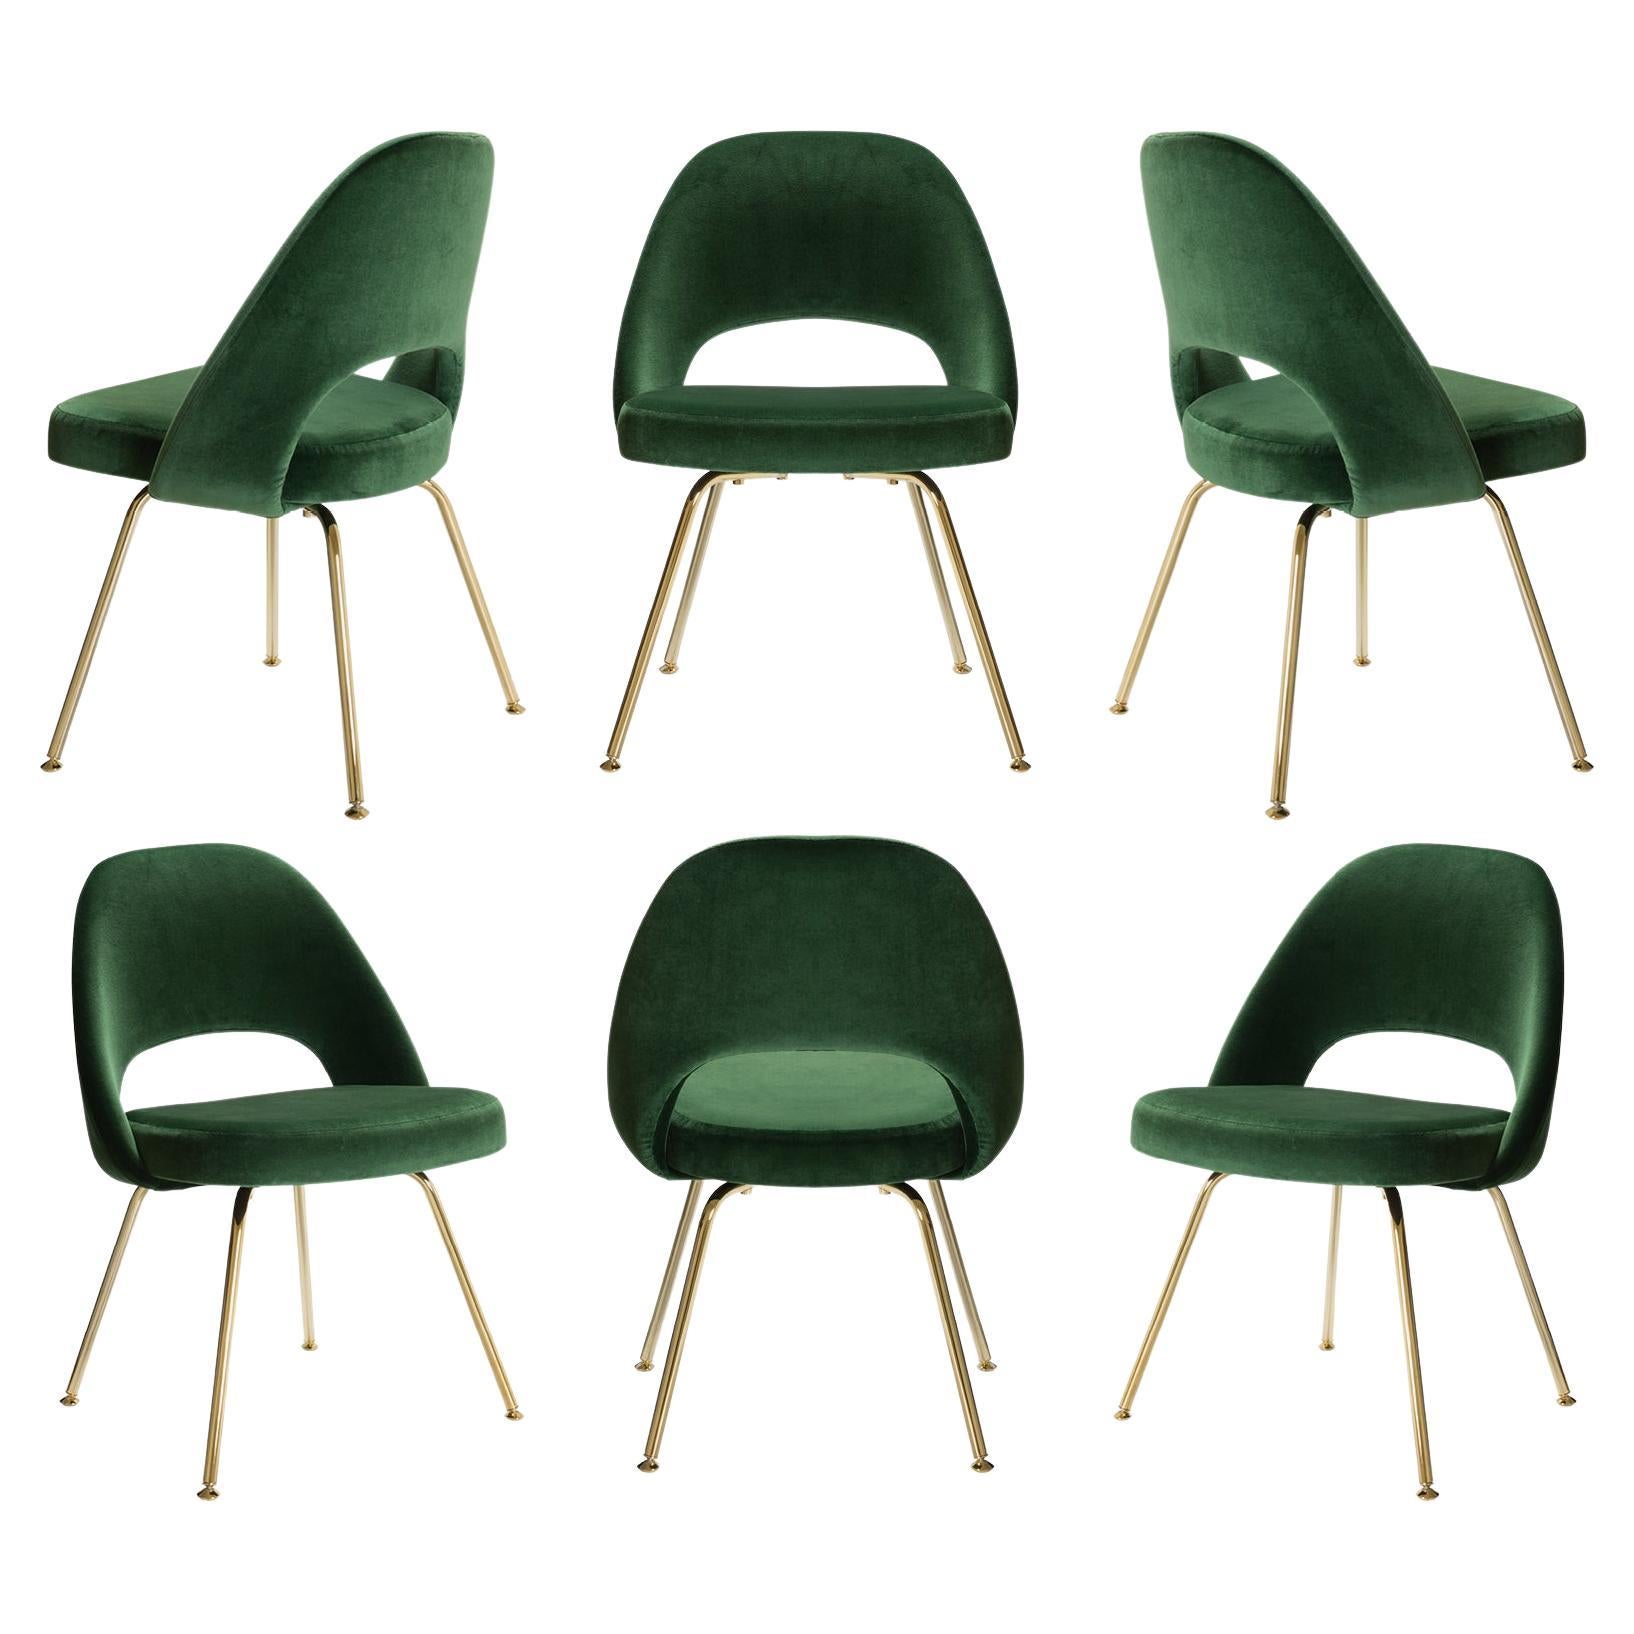 Saarinen Executive Armless Chairs in Emerald Velvet, Gold Edition, Set of 6 For Sale